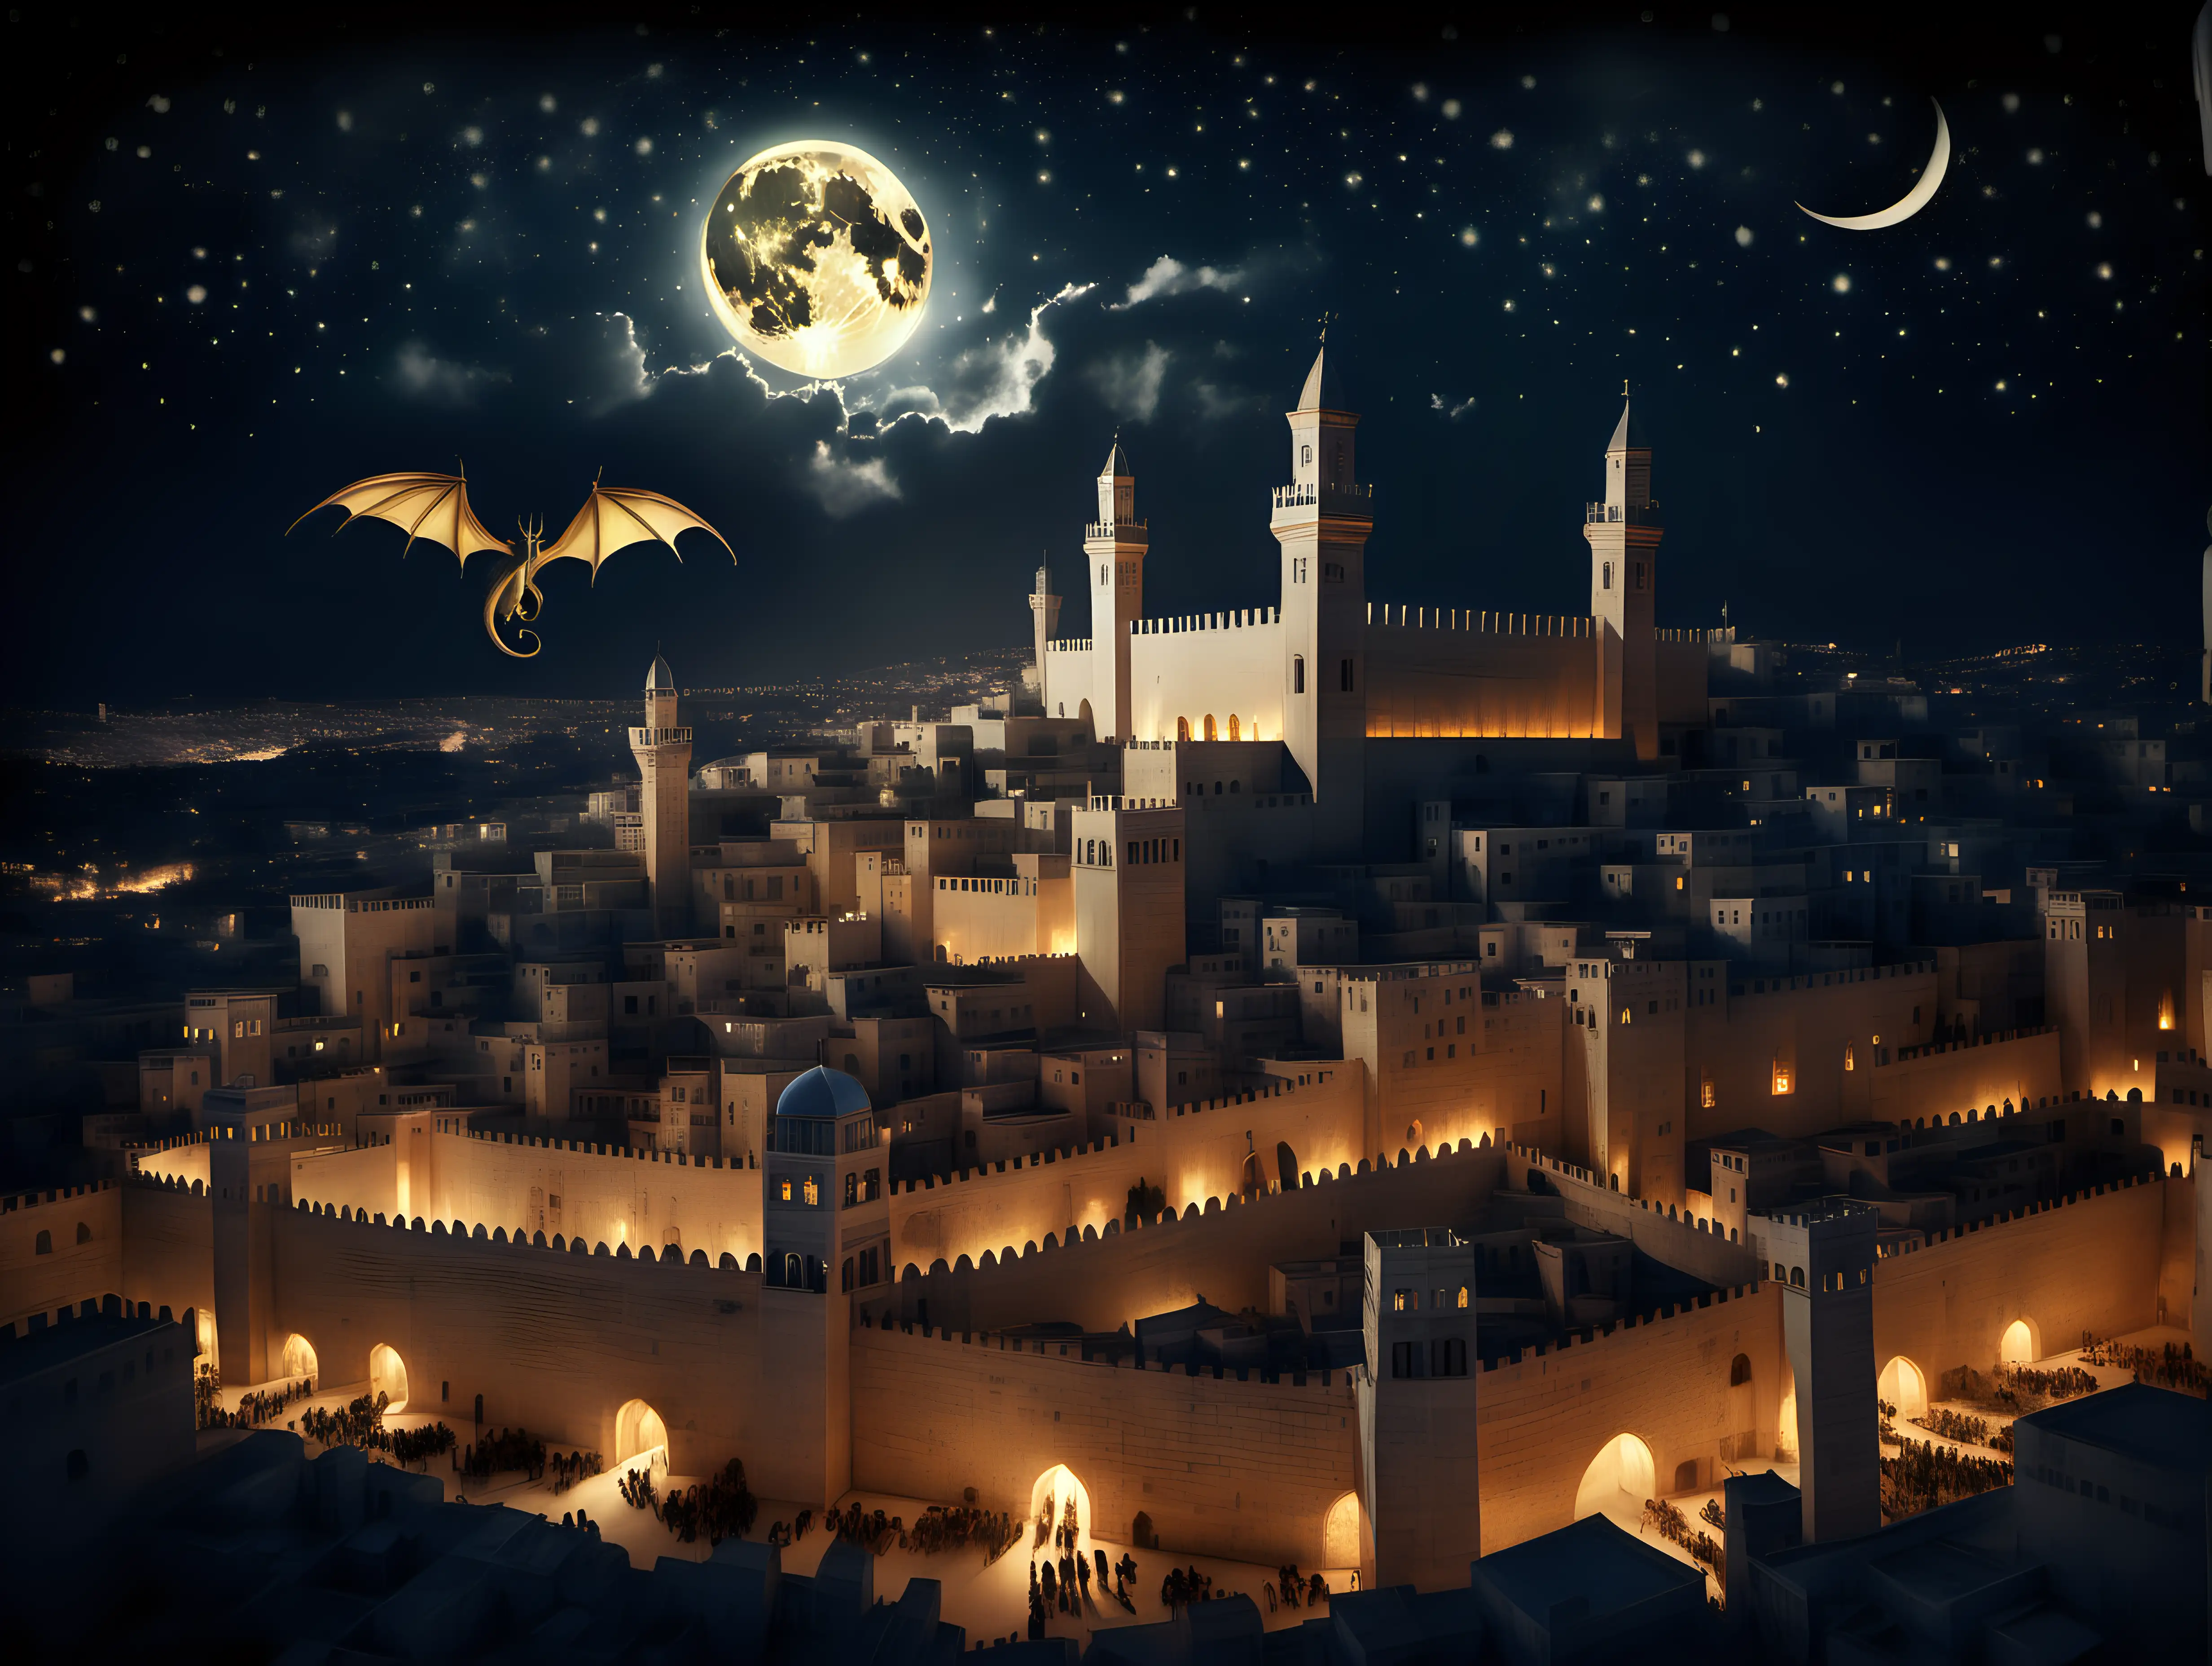 Age Of The Dragons in ancient Jerusalem at night with stars and moon